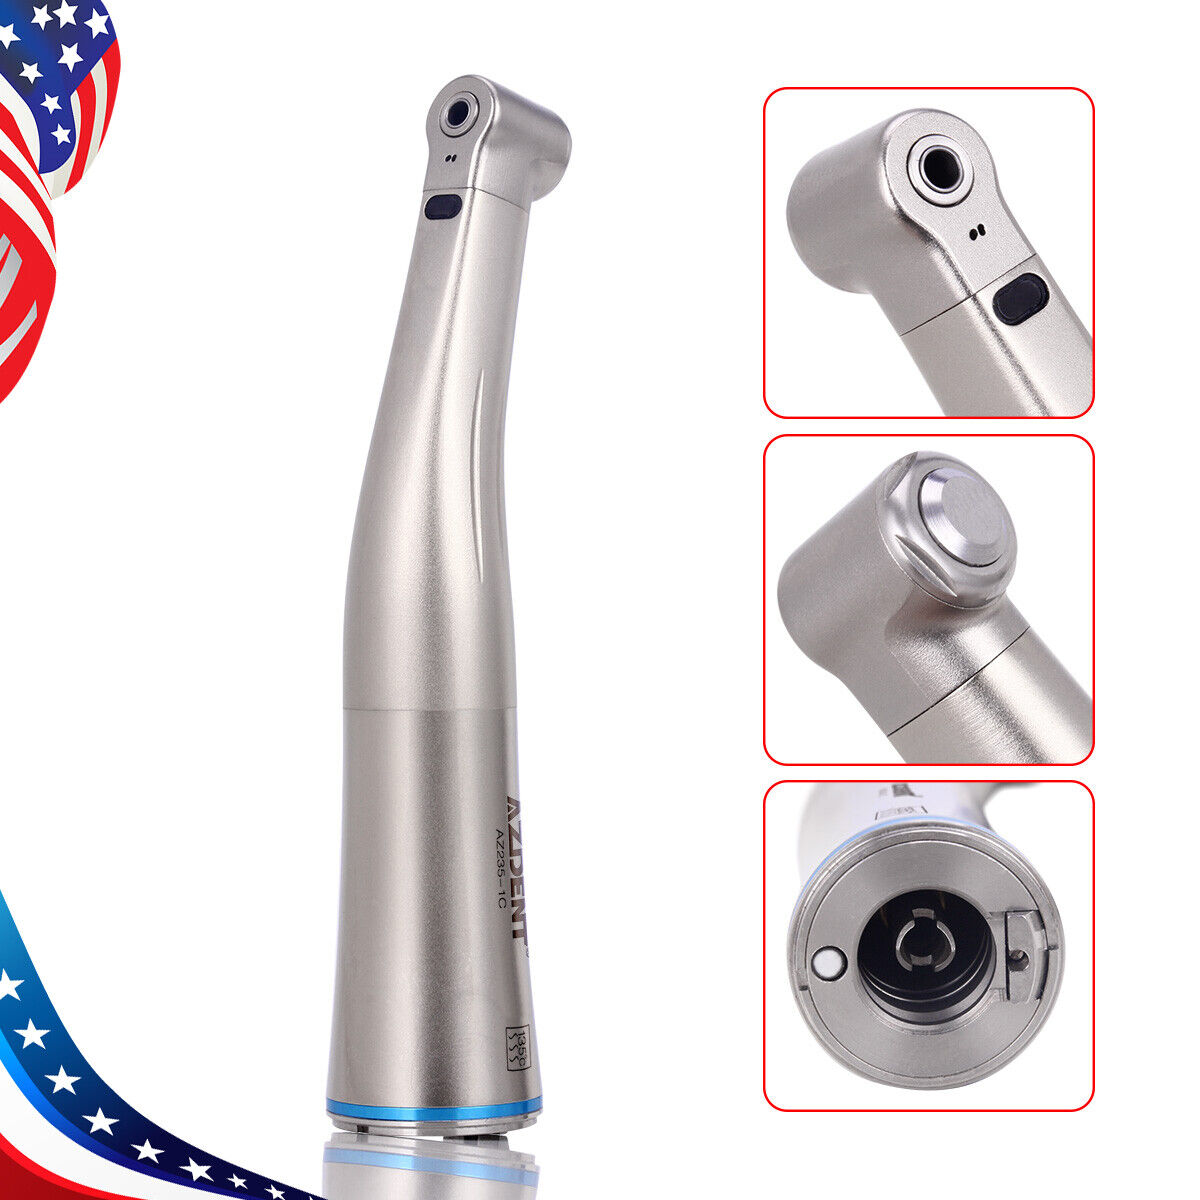 Dental 1:5 Increasing Contra Angle Optic LED Handpiece Fit Electric Motor